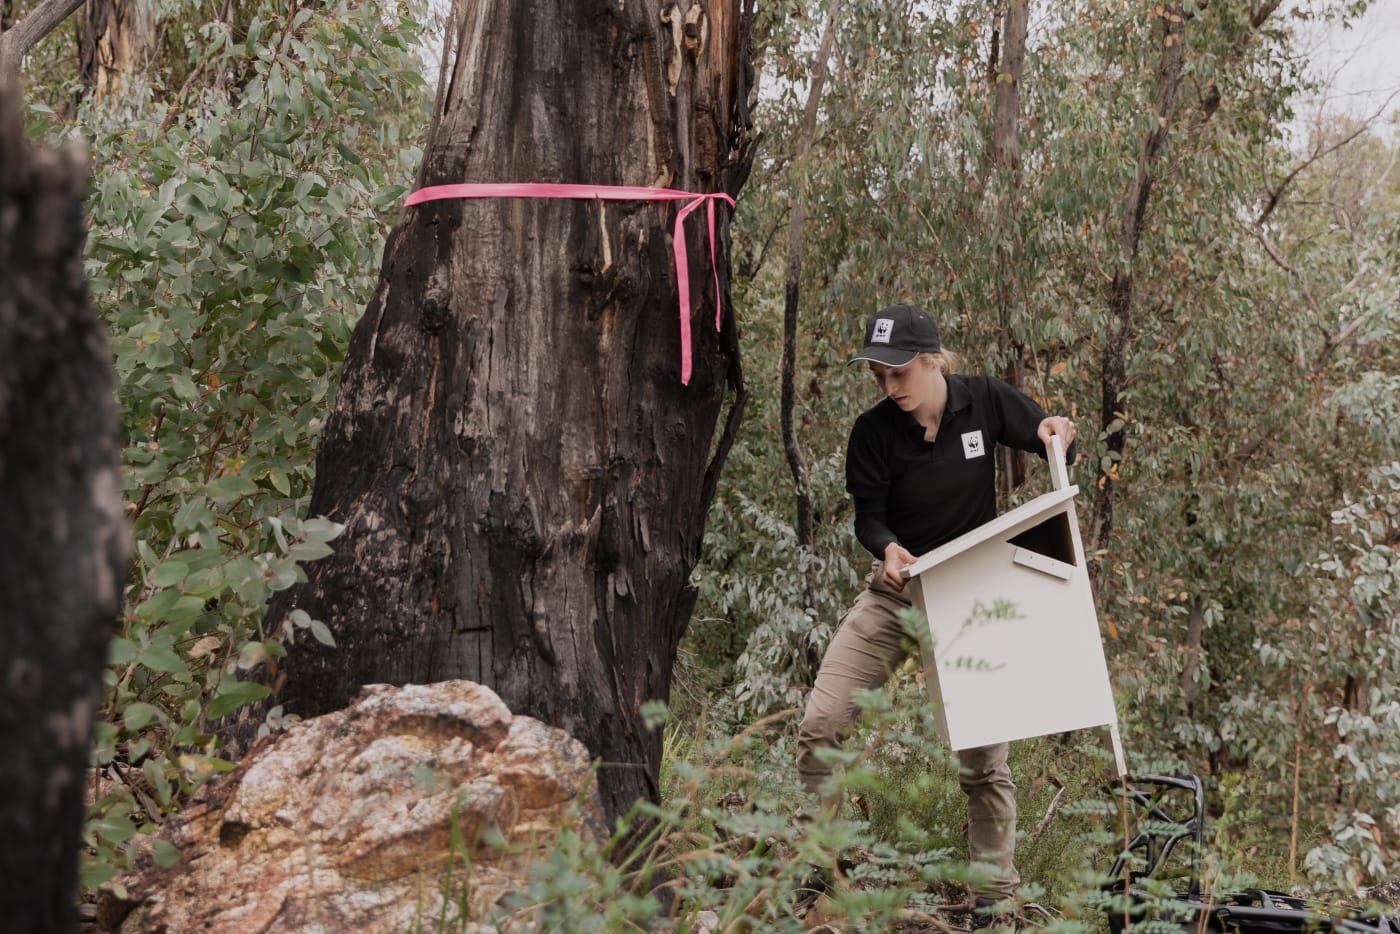 Dr Kita Ashman from WWF-Australia with a greater glider nest box in Tallaganda National Park, NSW